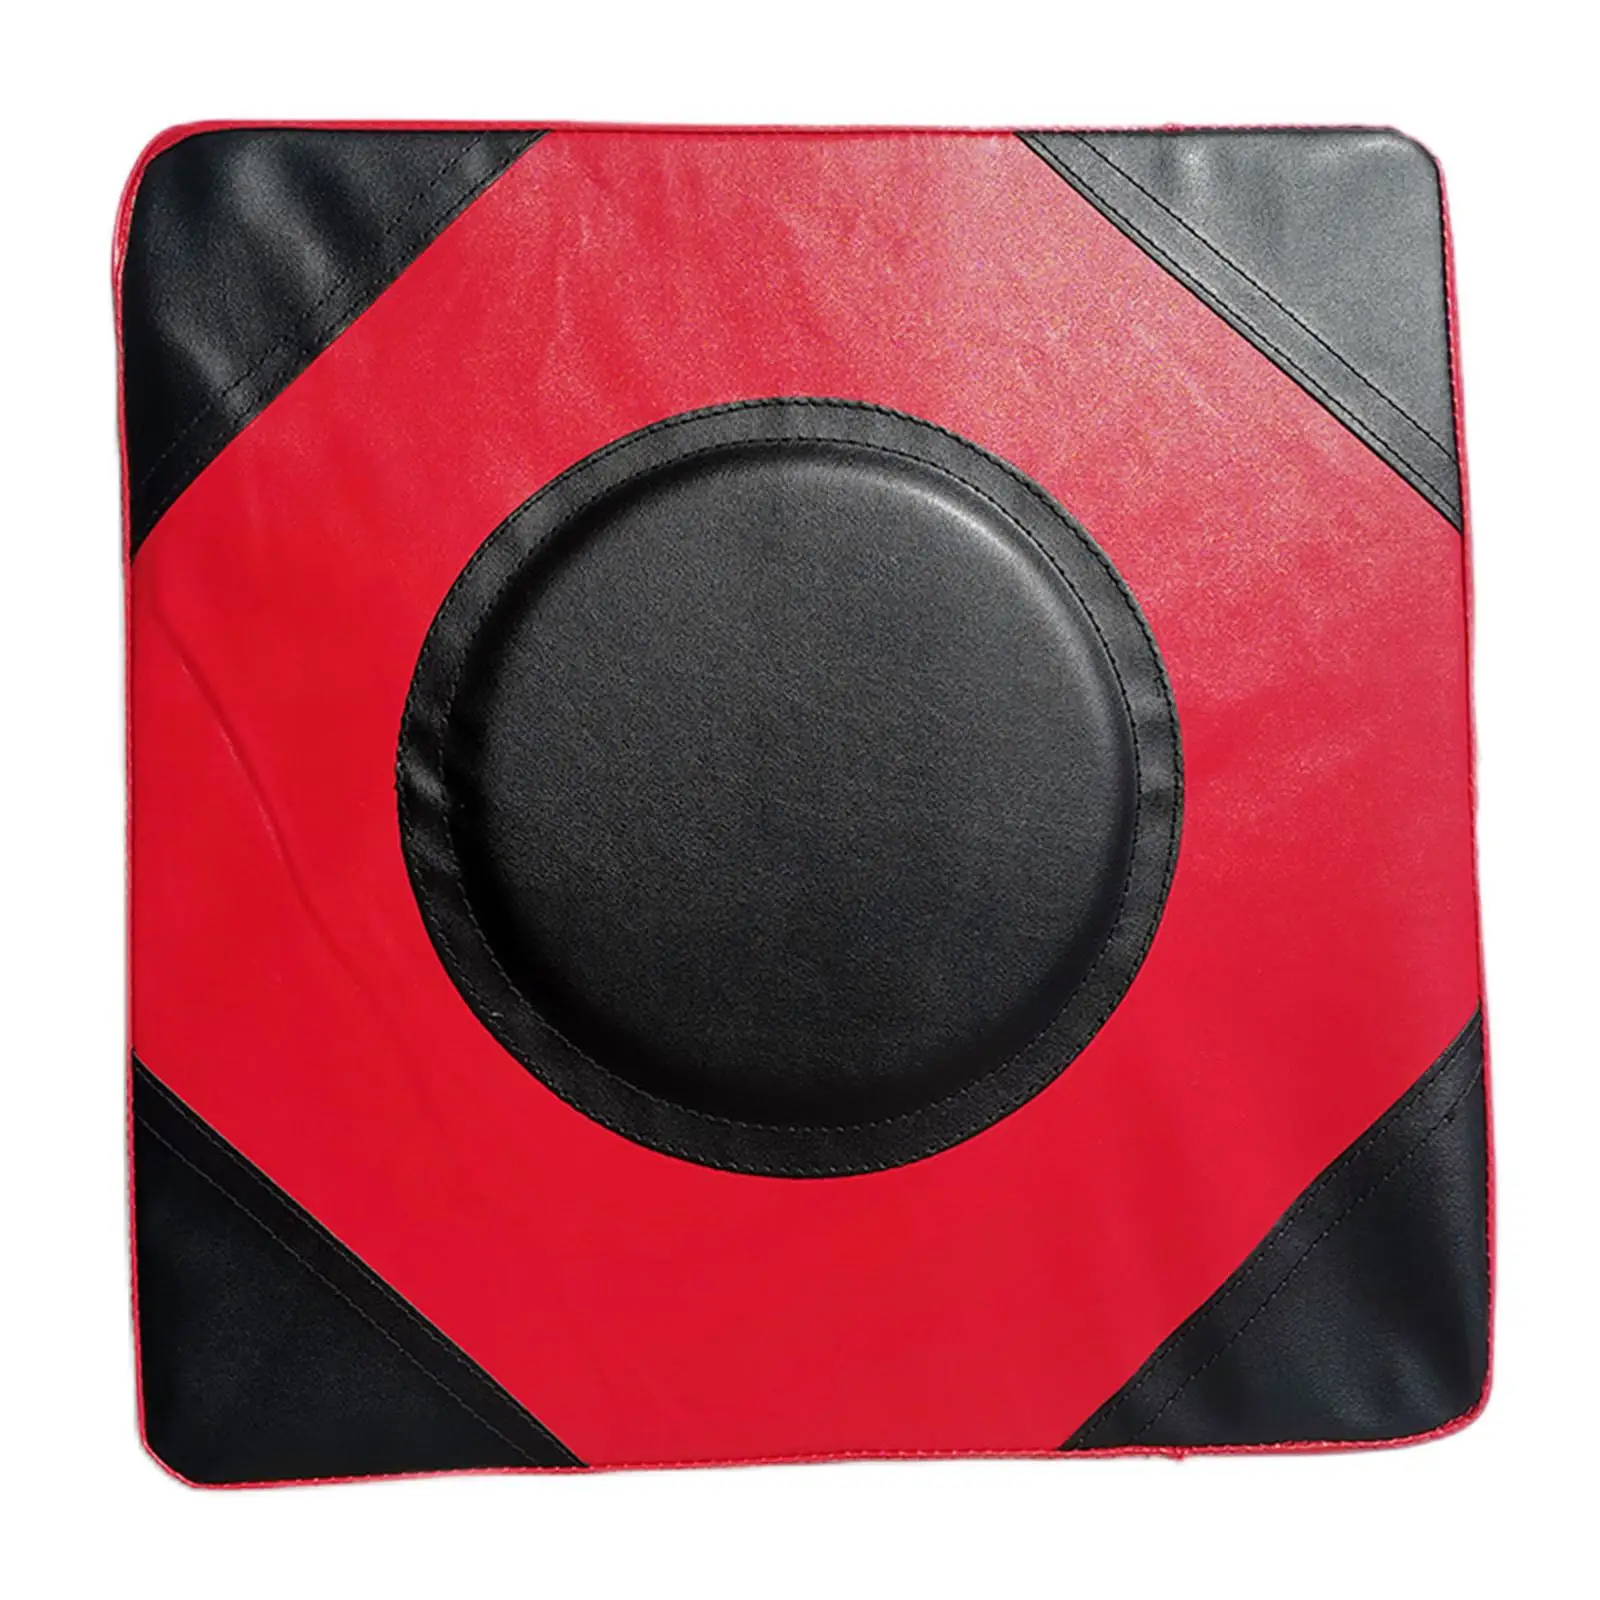 Wall Focus Target Punch Practice Equipment Fighting Pad for Training Pads